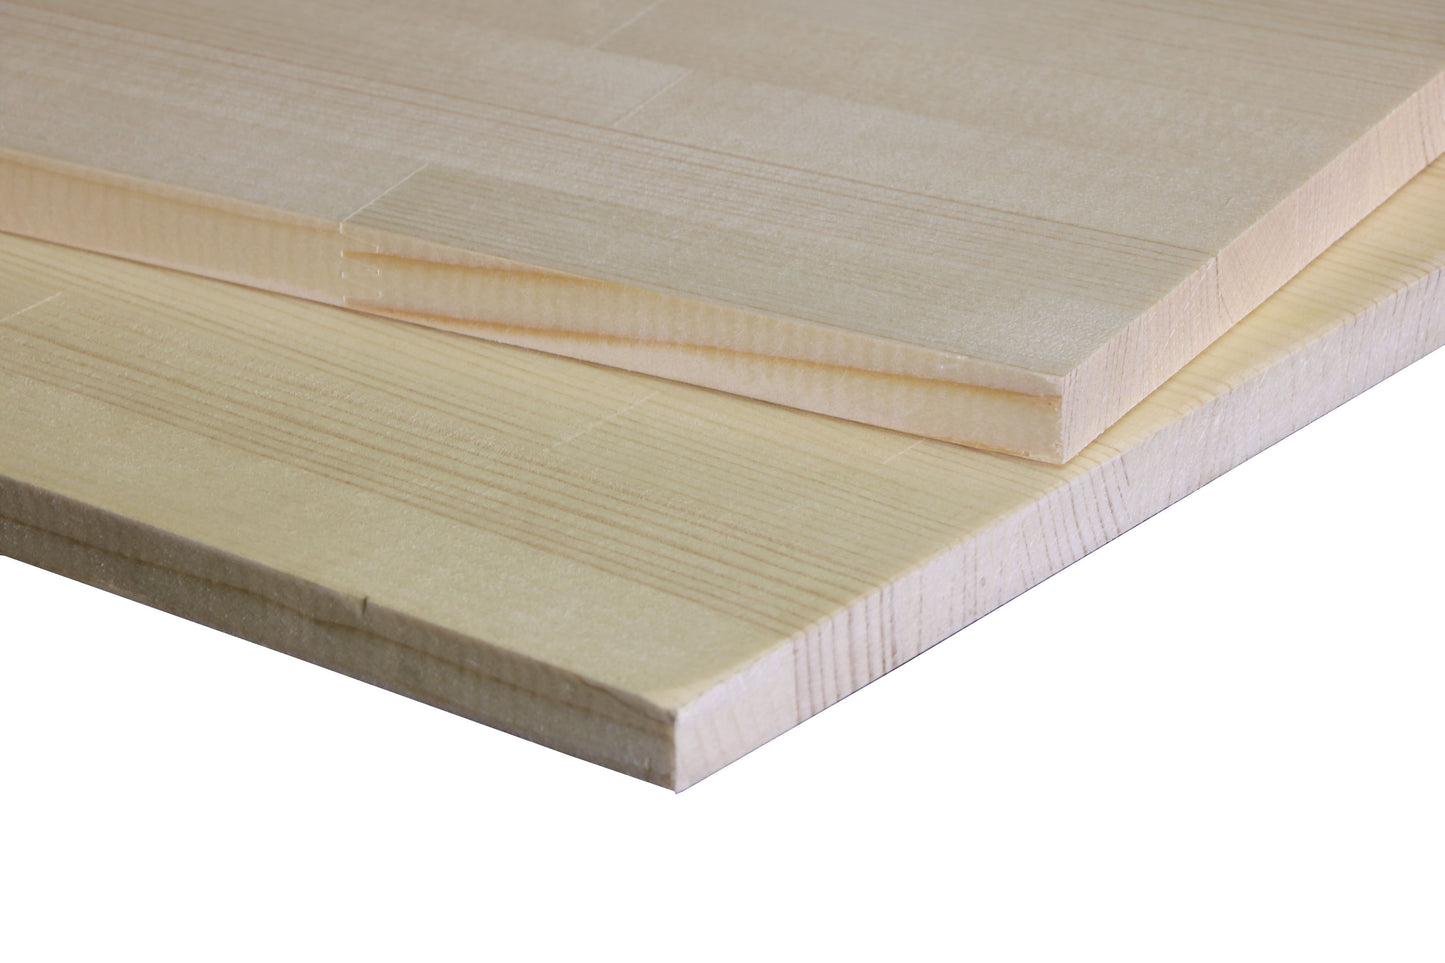 Ele-Joint Natural Wood - White Spruce AA Unfinished - 5/8" x 16" x 4'